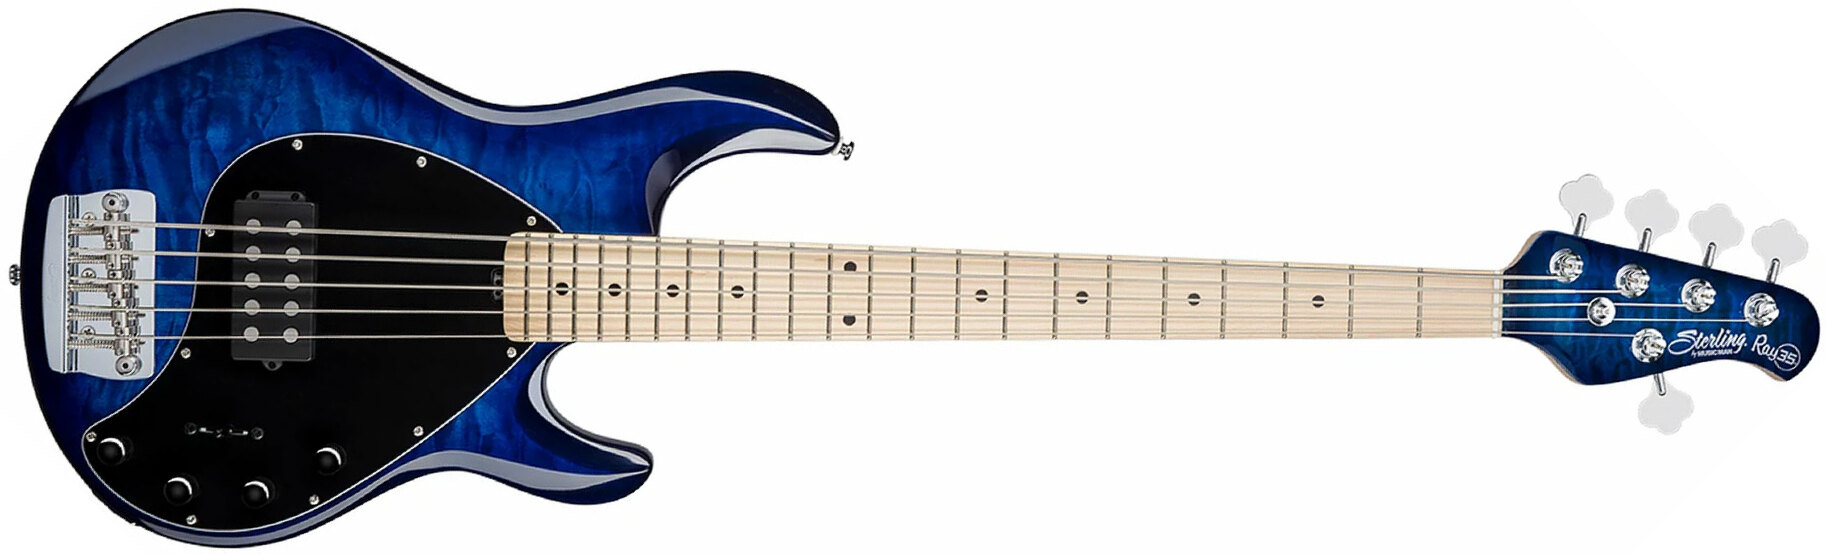 Sterling By Musicman Stingray5 Ray35qm 5-cordes Active Mn - Neptune Blue - Basse Électrique Solid Body - Main picture